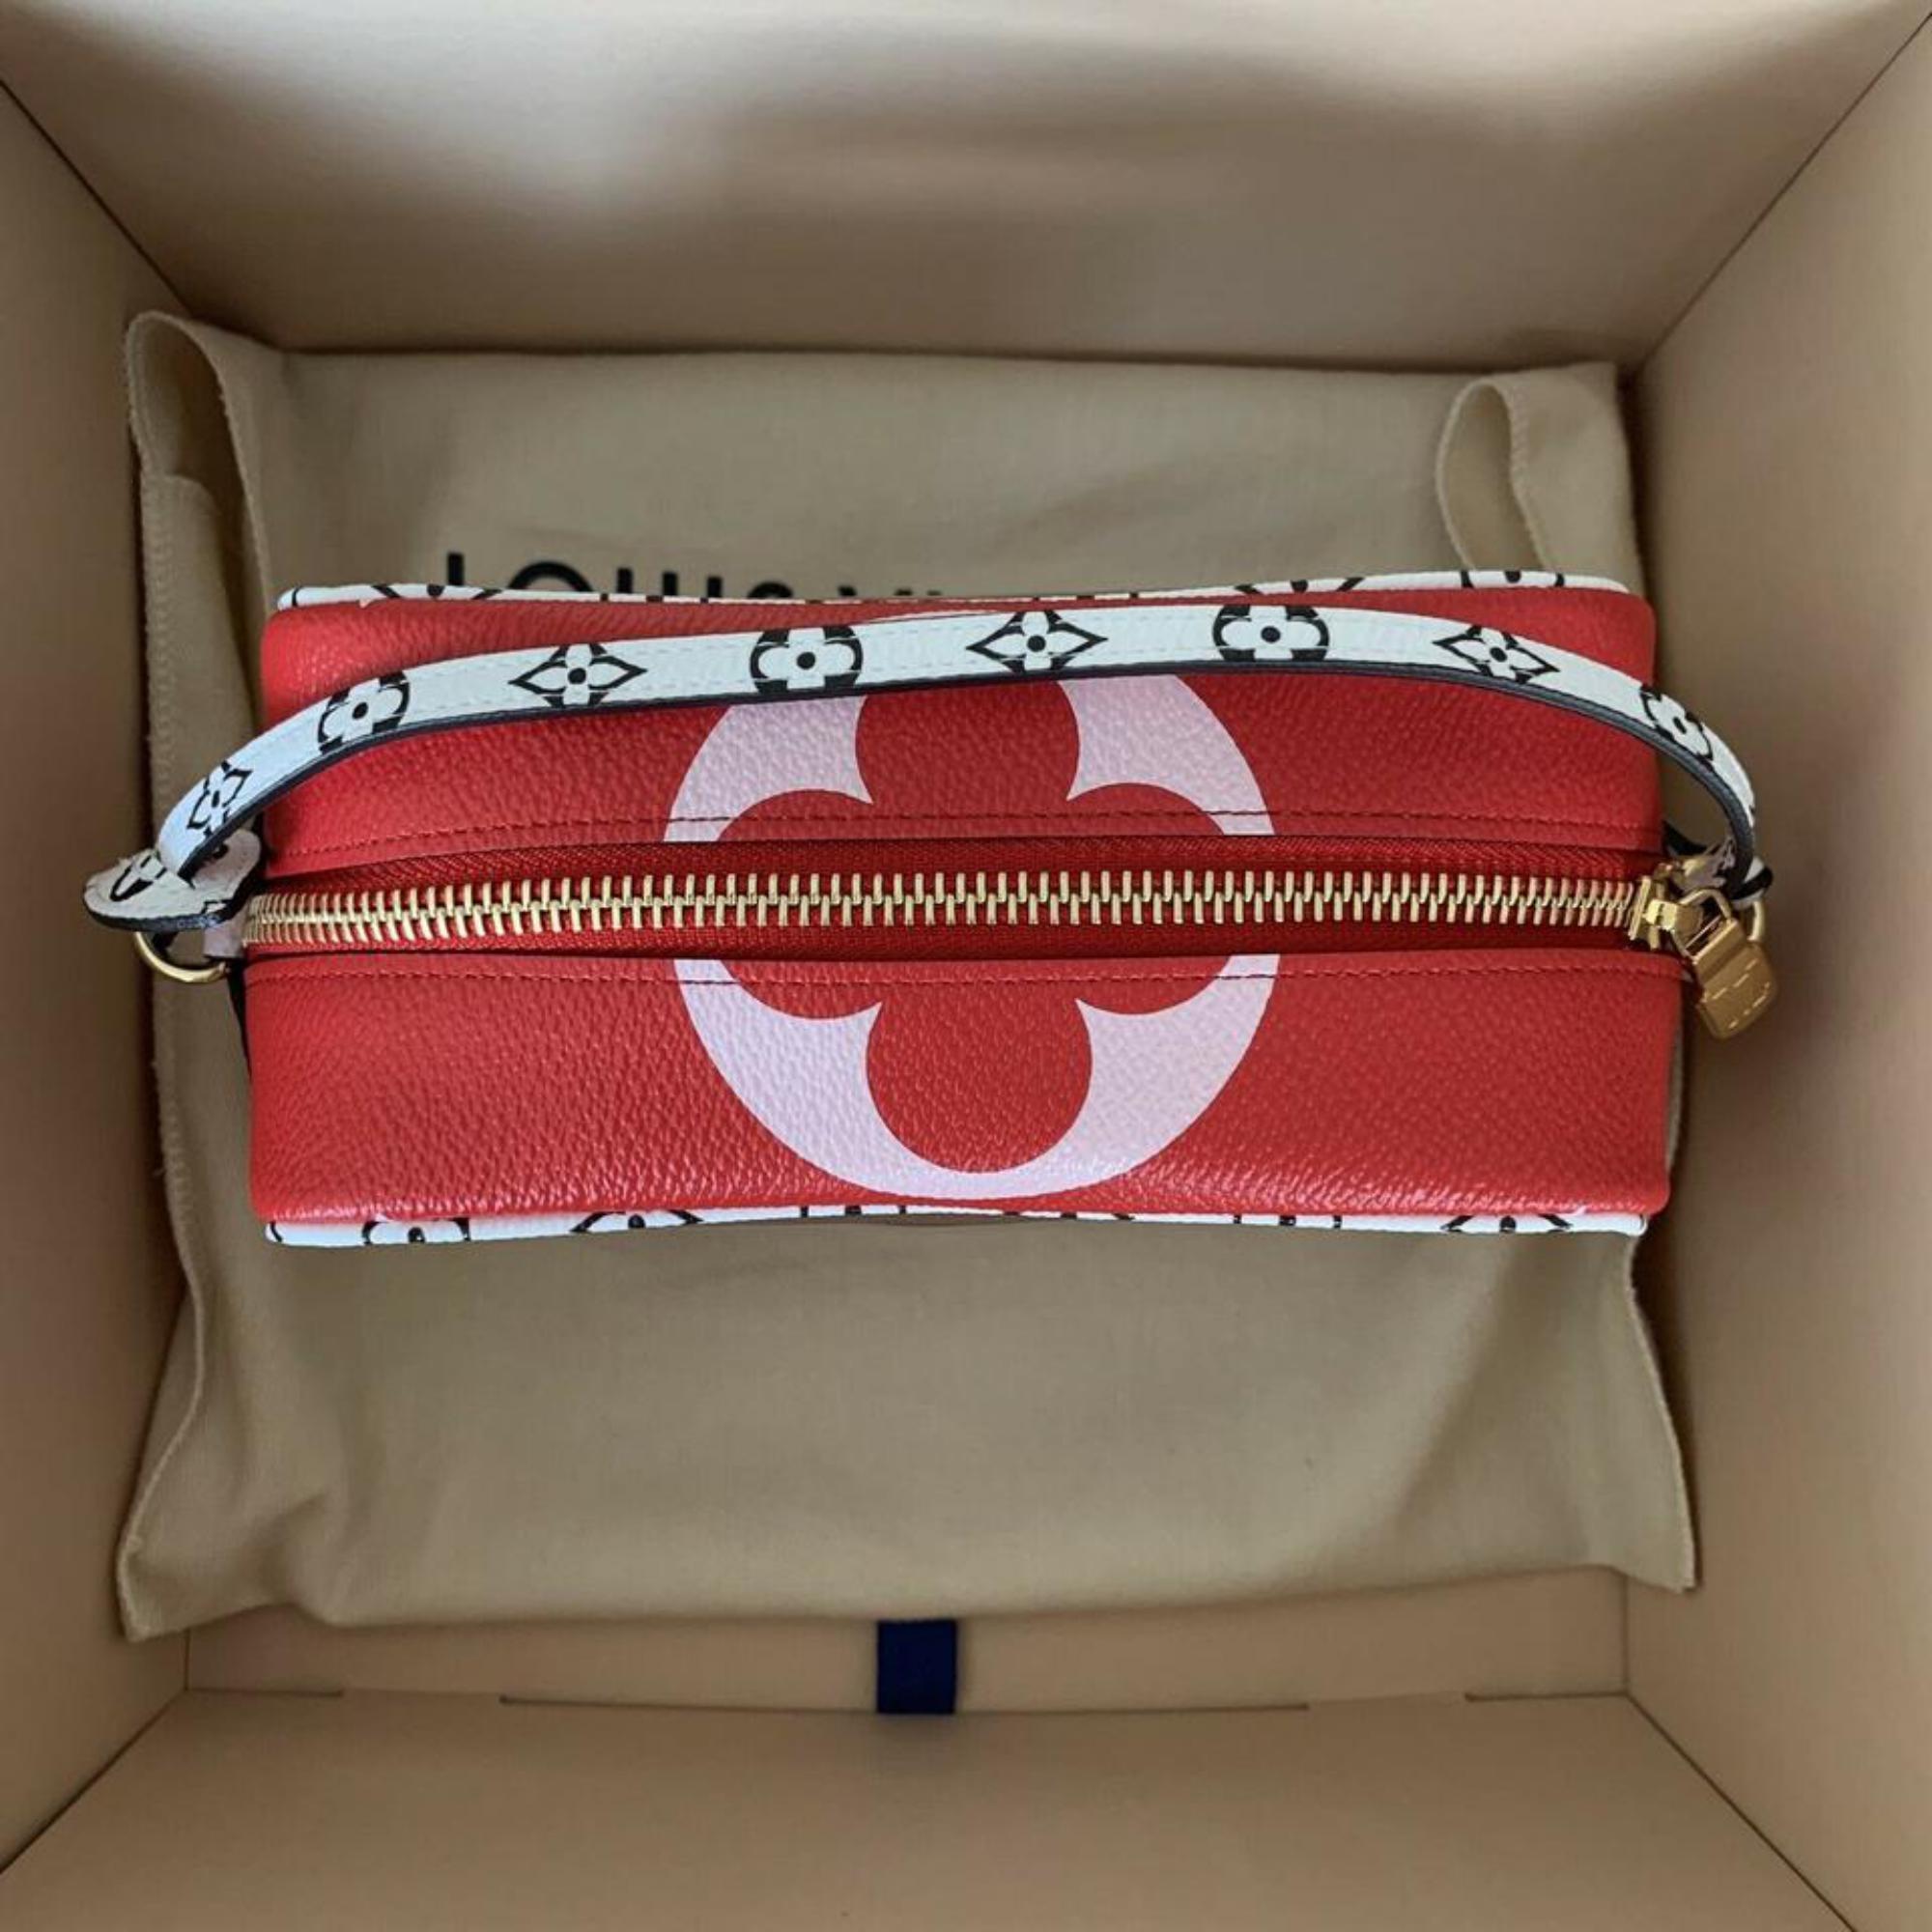 Louis Vuitton Translucent Ss19 Giants Pouch Clear Camera 870431 Red Shoulder Bag 3